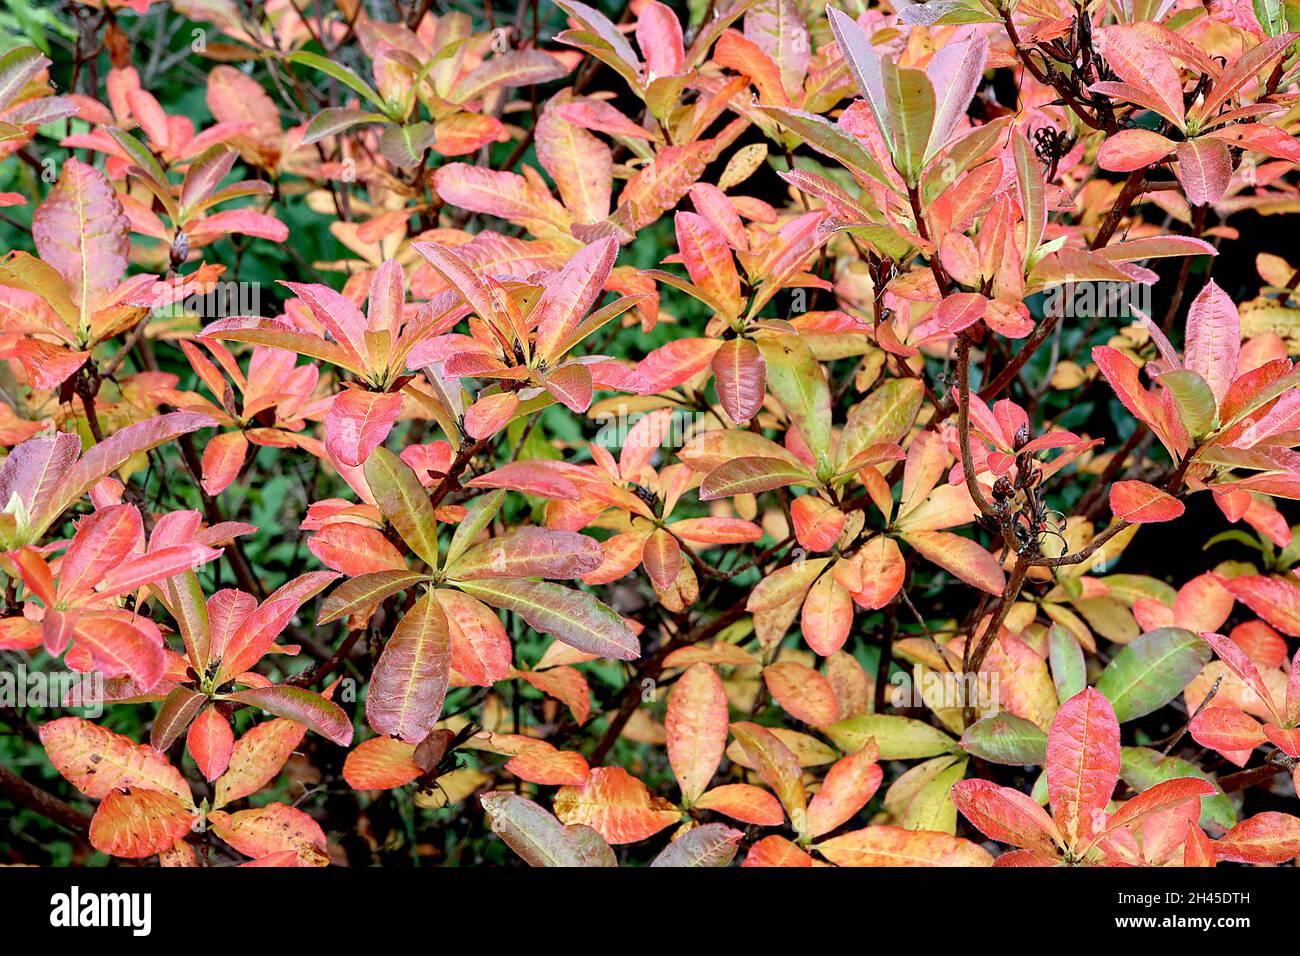 Rhododendron luteum yellow azalea – glossy elliptic yellow, orange, red and dark green leaves,  October, England, UK Stock Photo